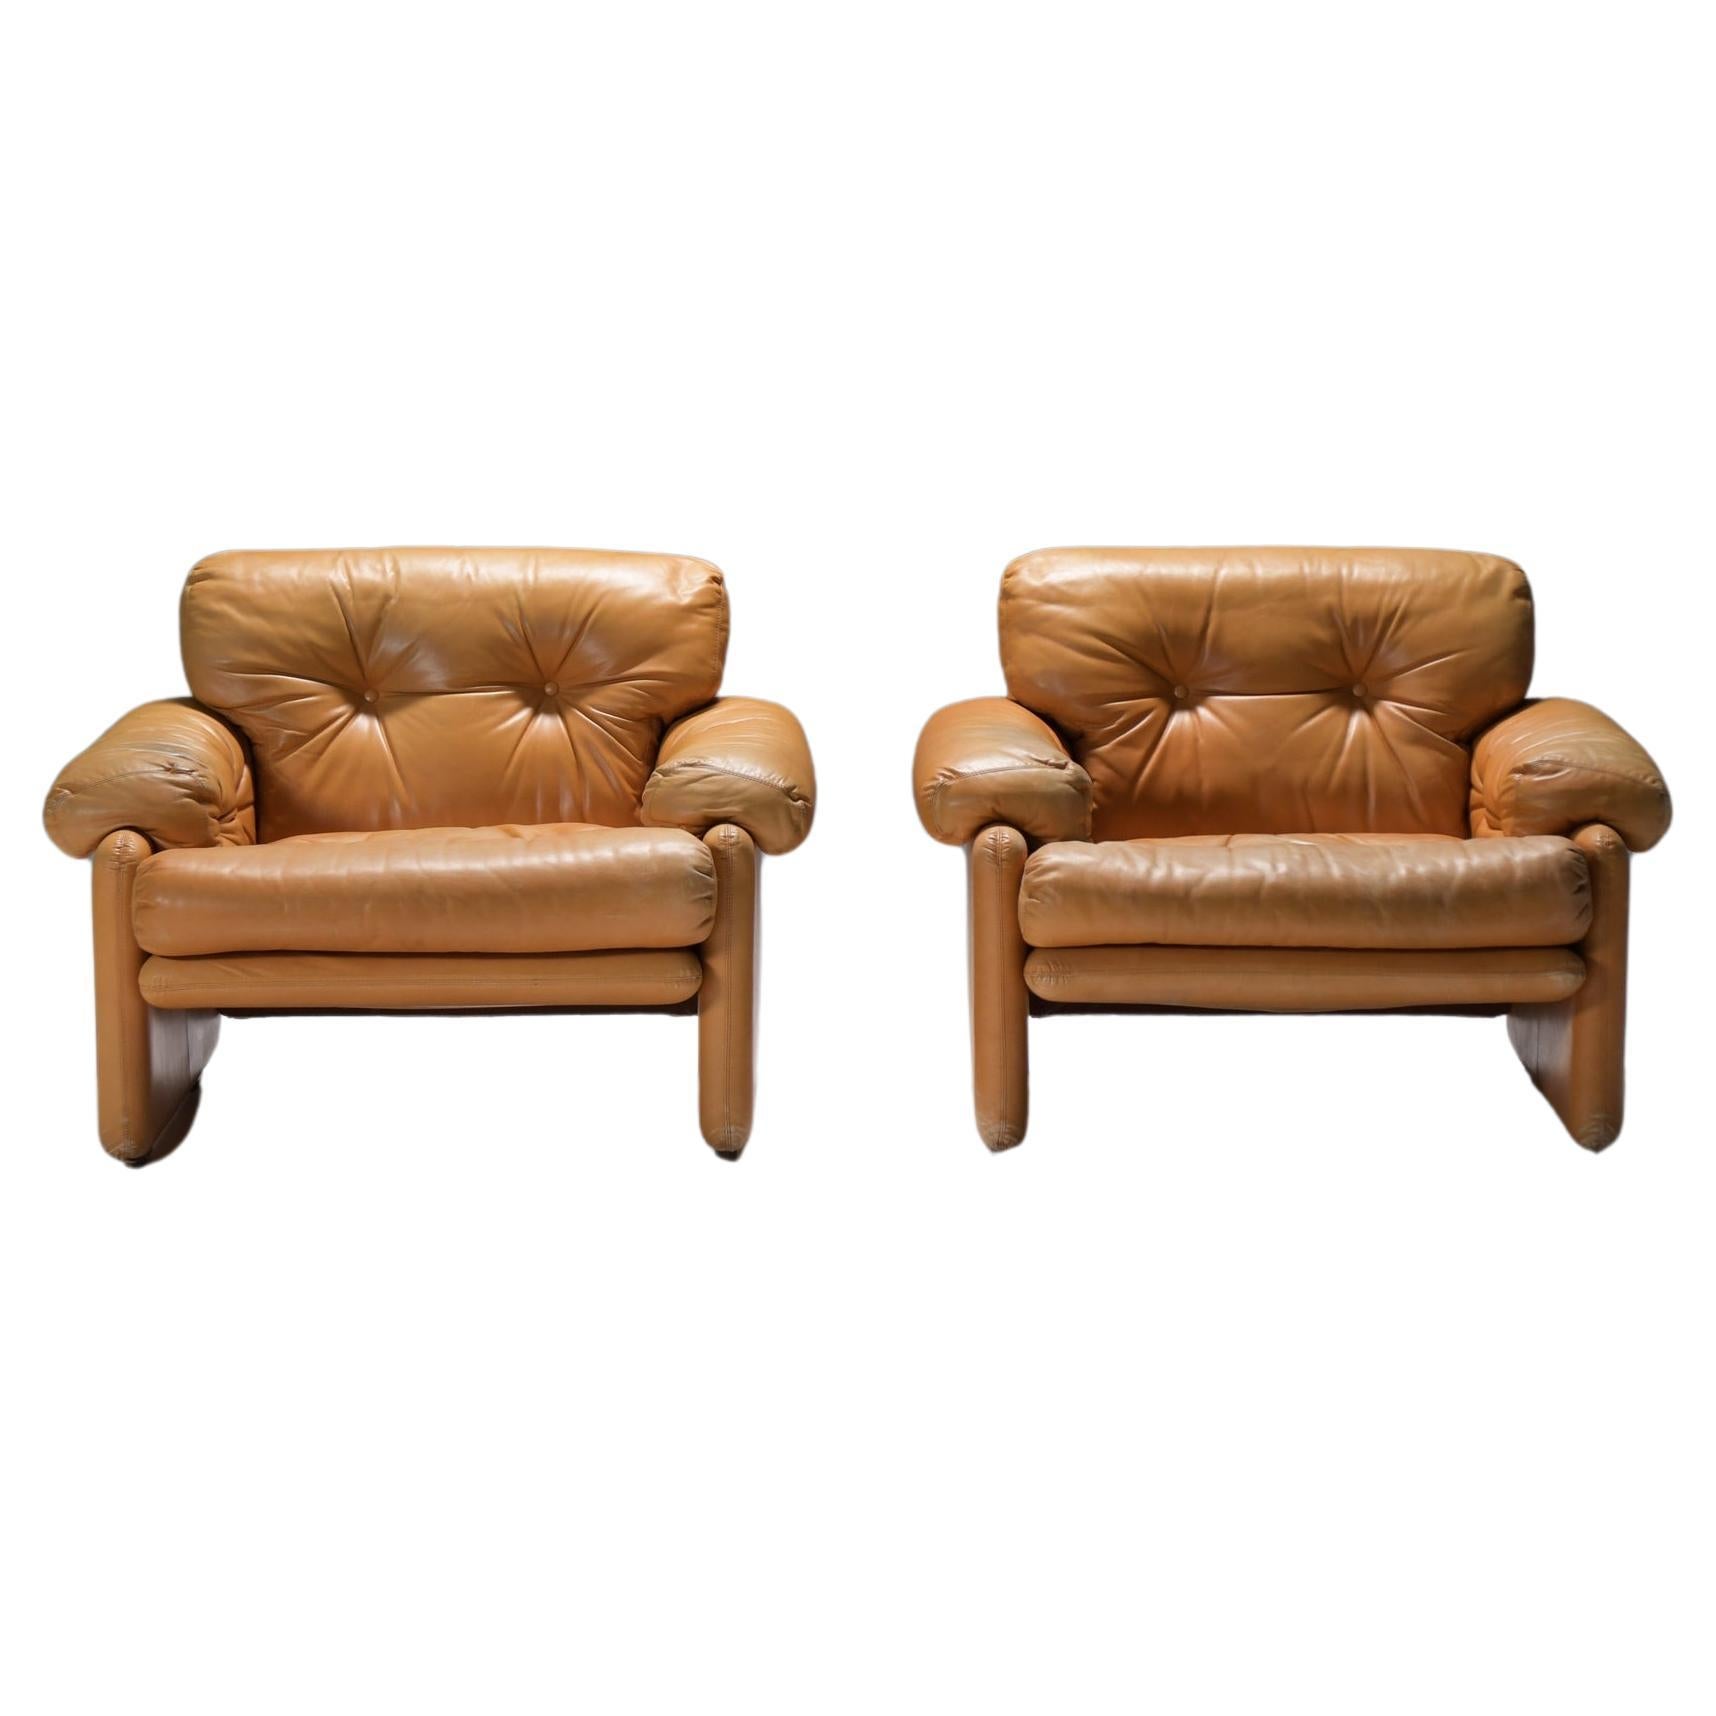  Stunning Coronado chairs in cognac leather by Afra & Tobia Scarpa - B&B Italia For Sale